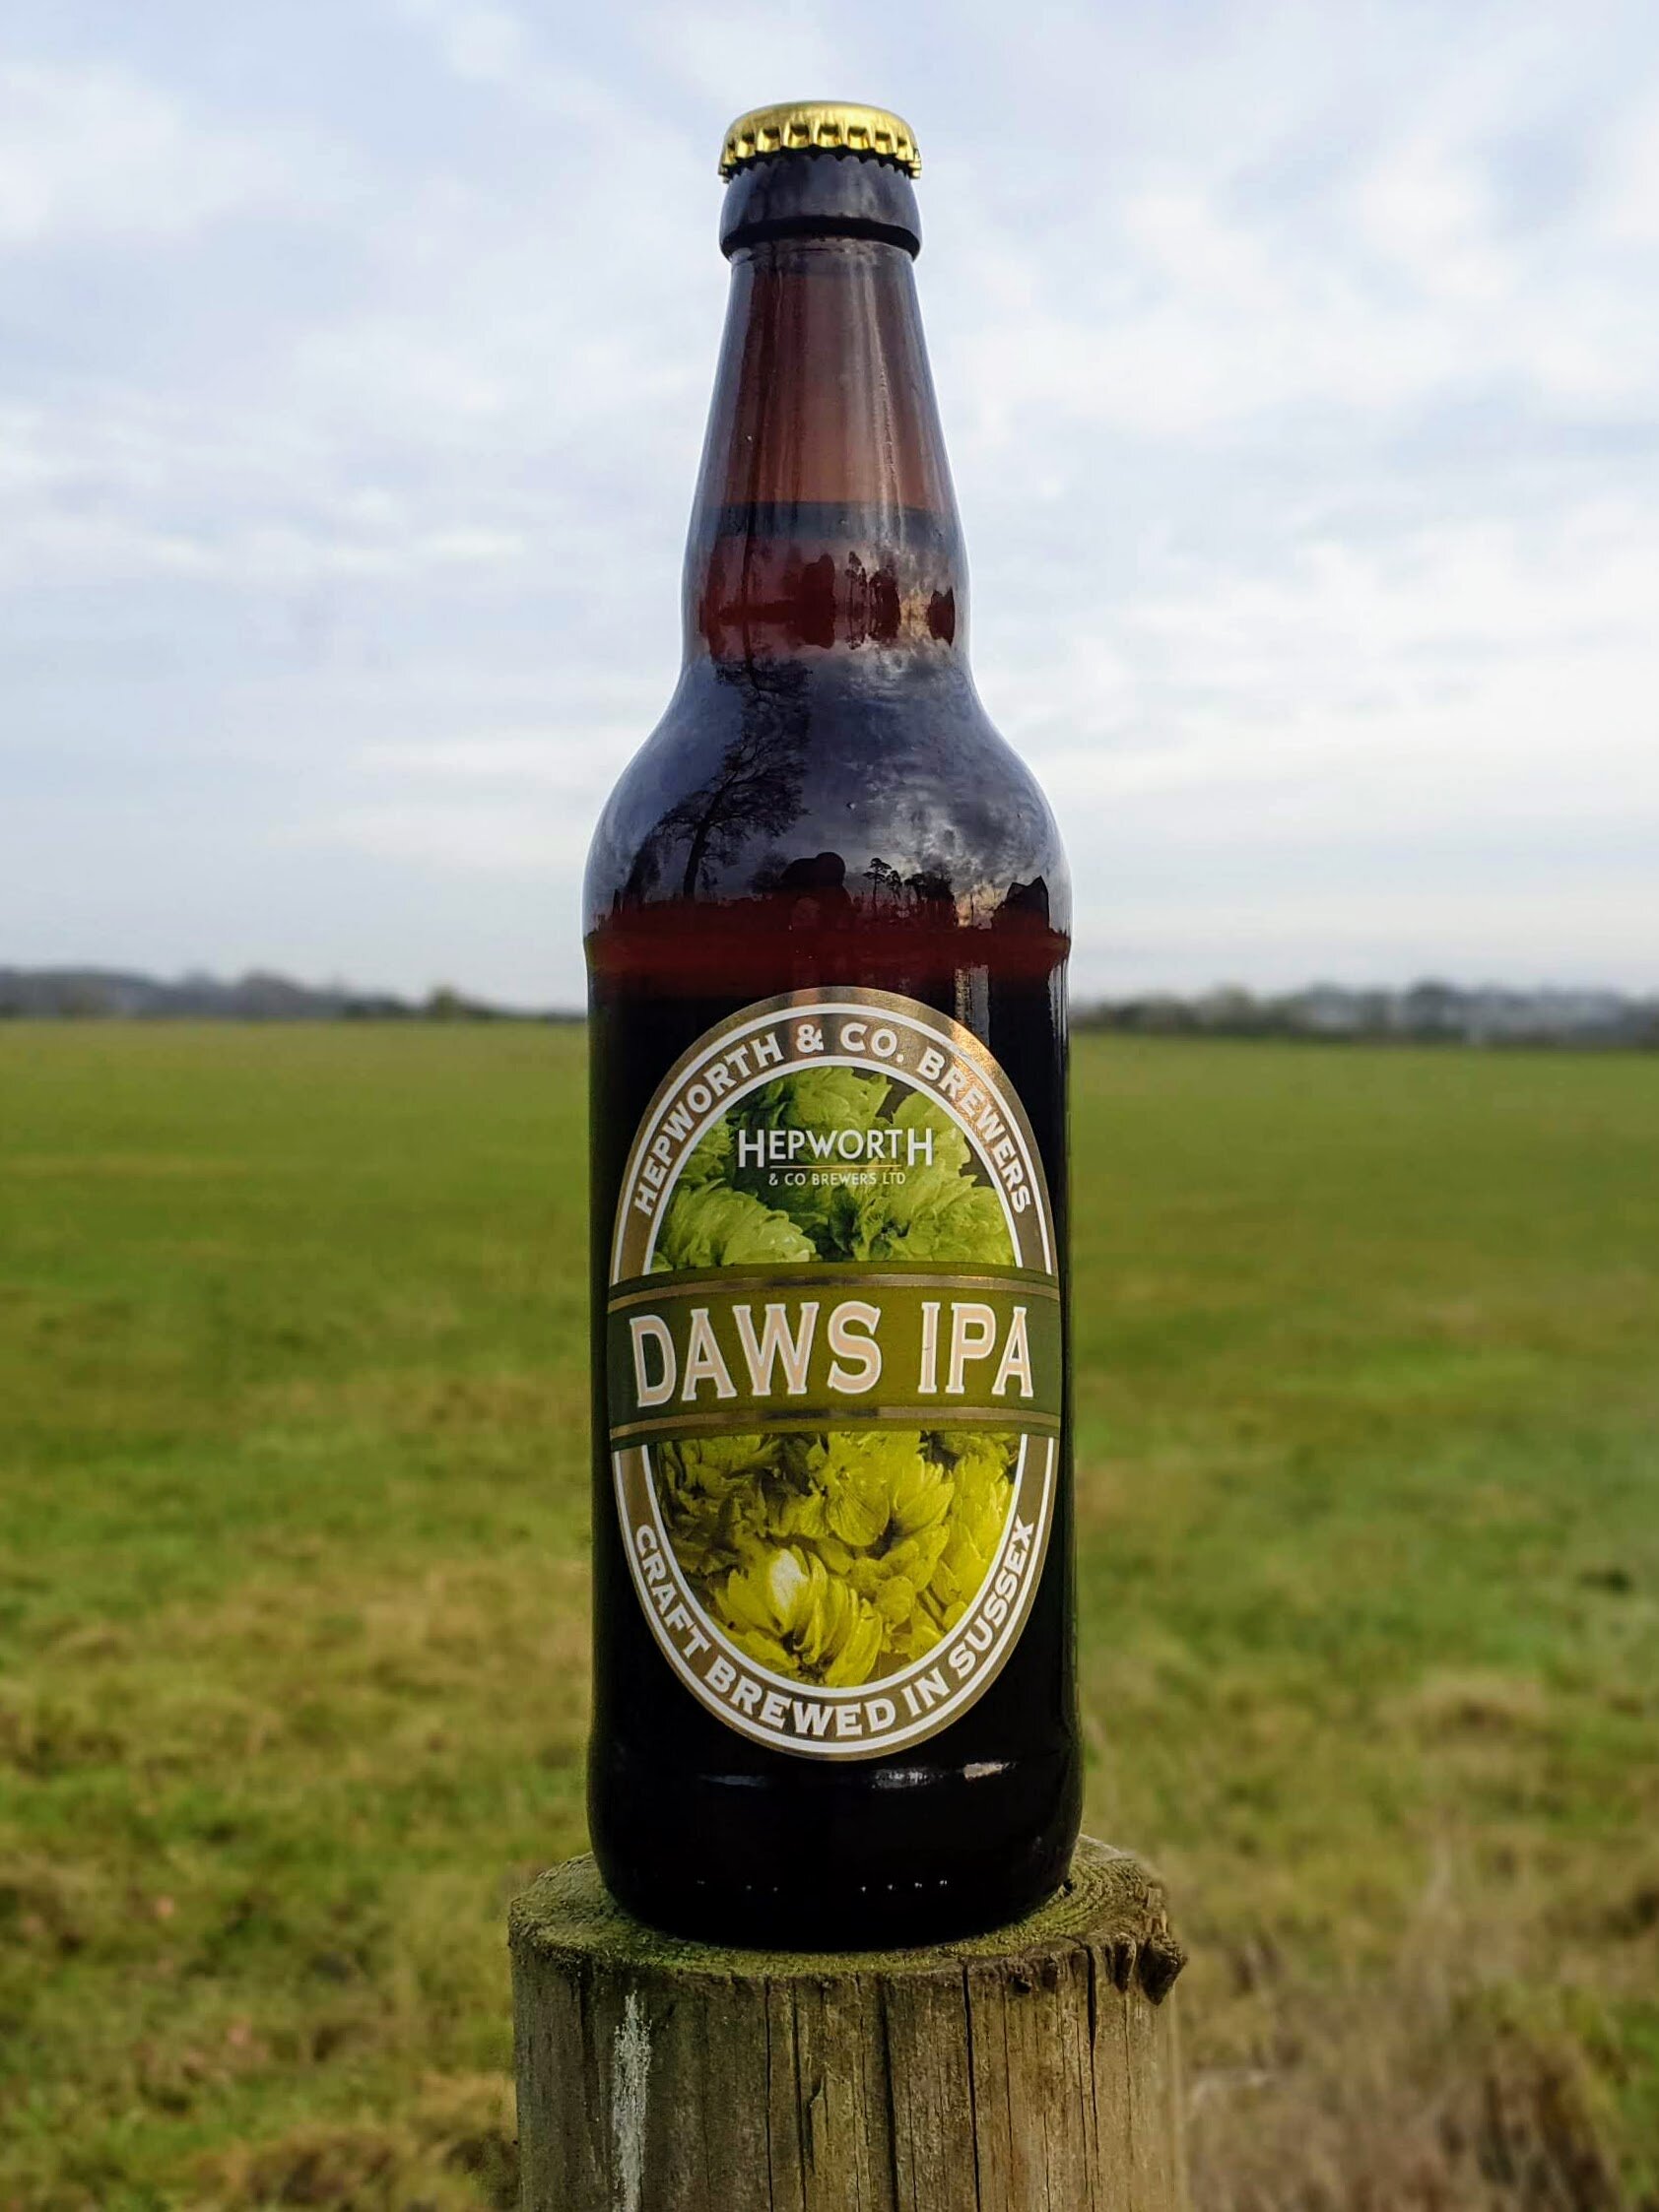 Picture of Daws from Hepworth Brewery in Sussex for the Beer Yeti review.